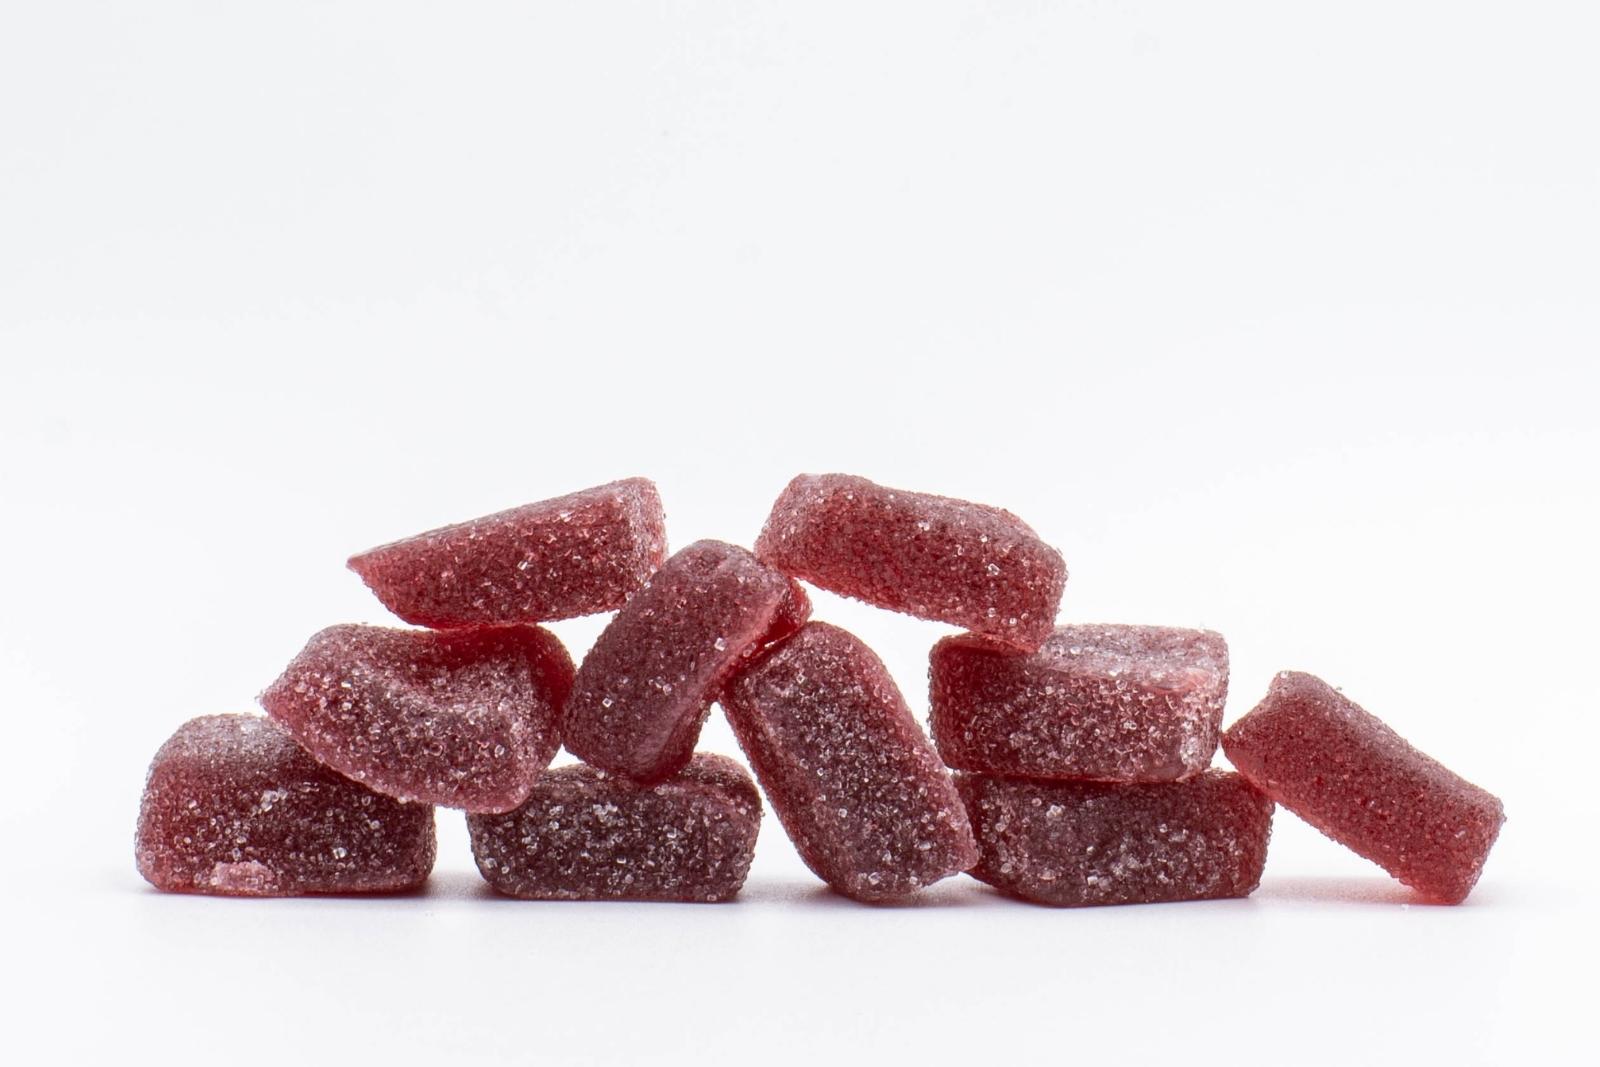 A group of Huckleberry CBD gummies by Cycling Frog, on a white background